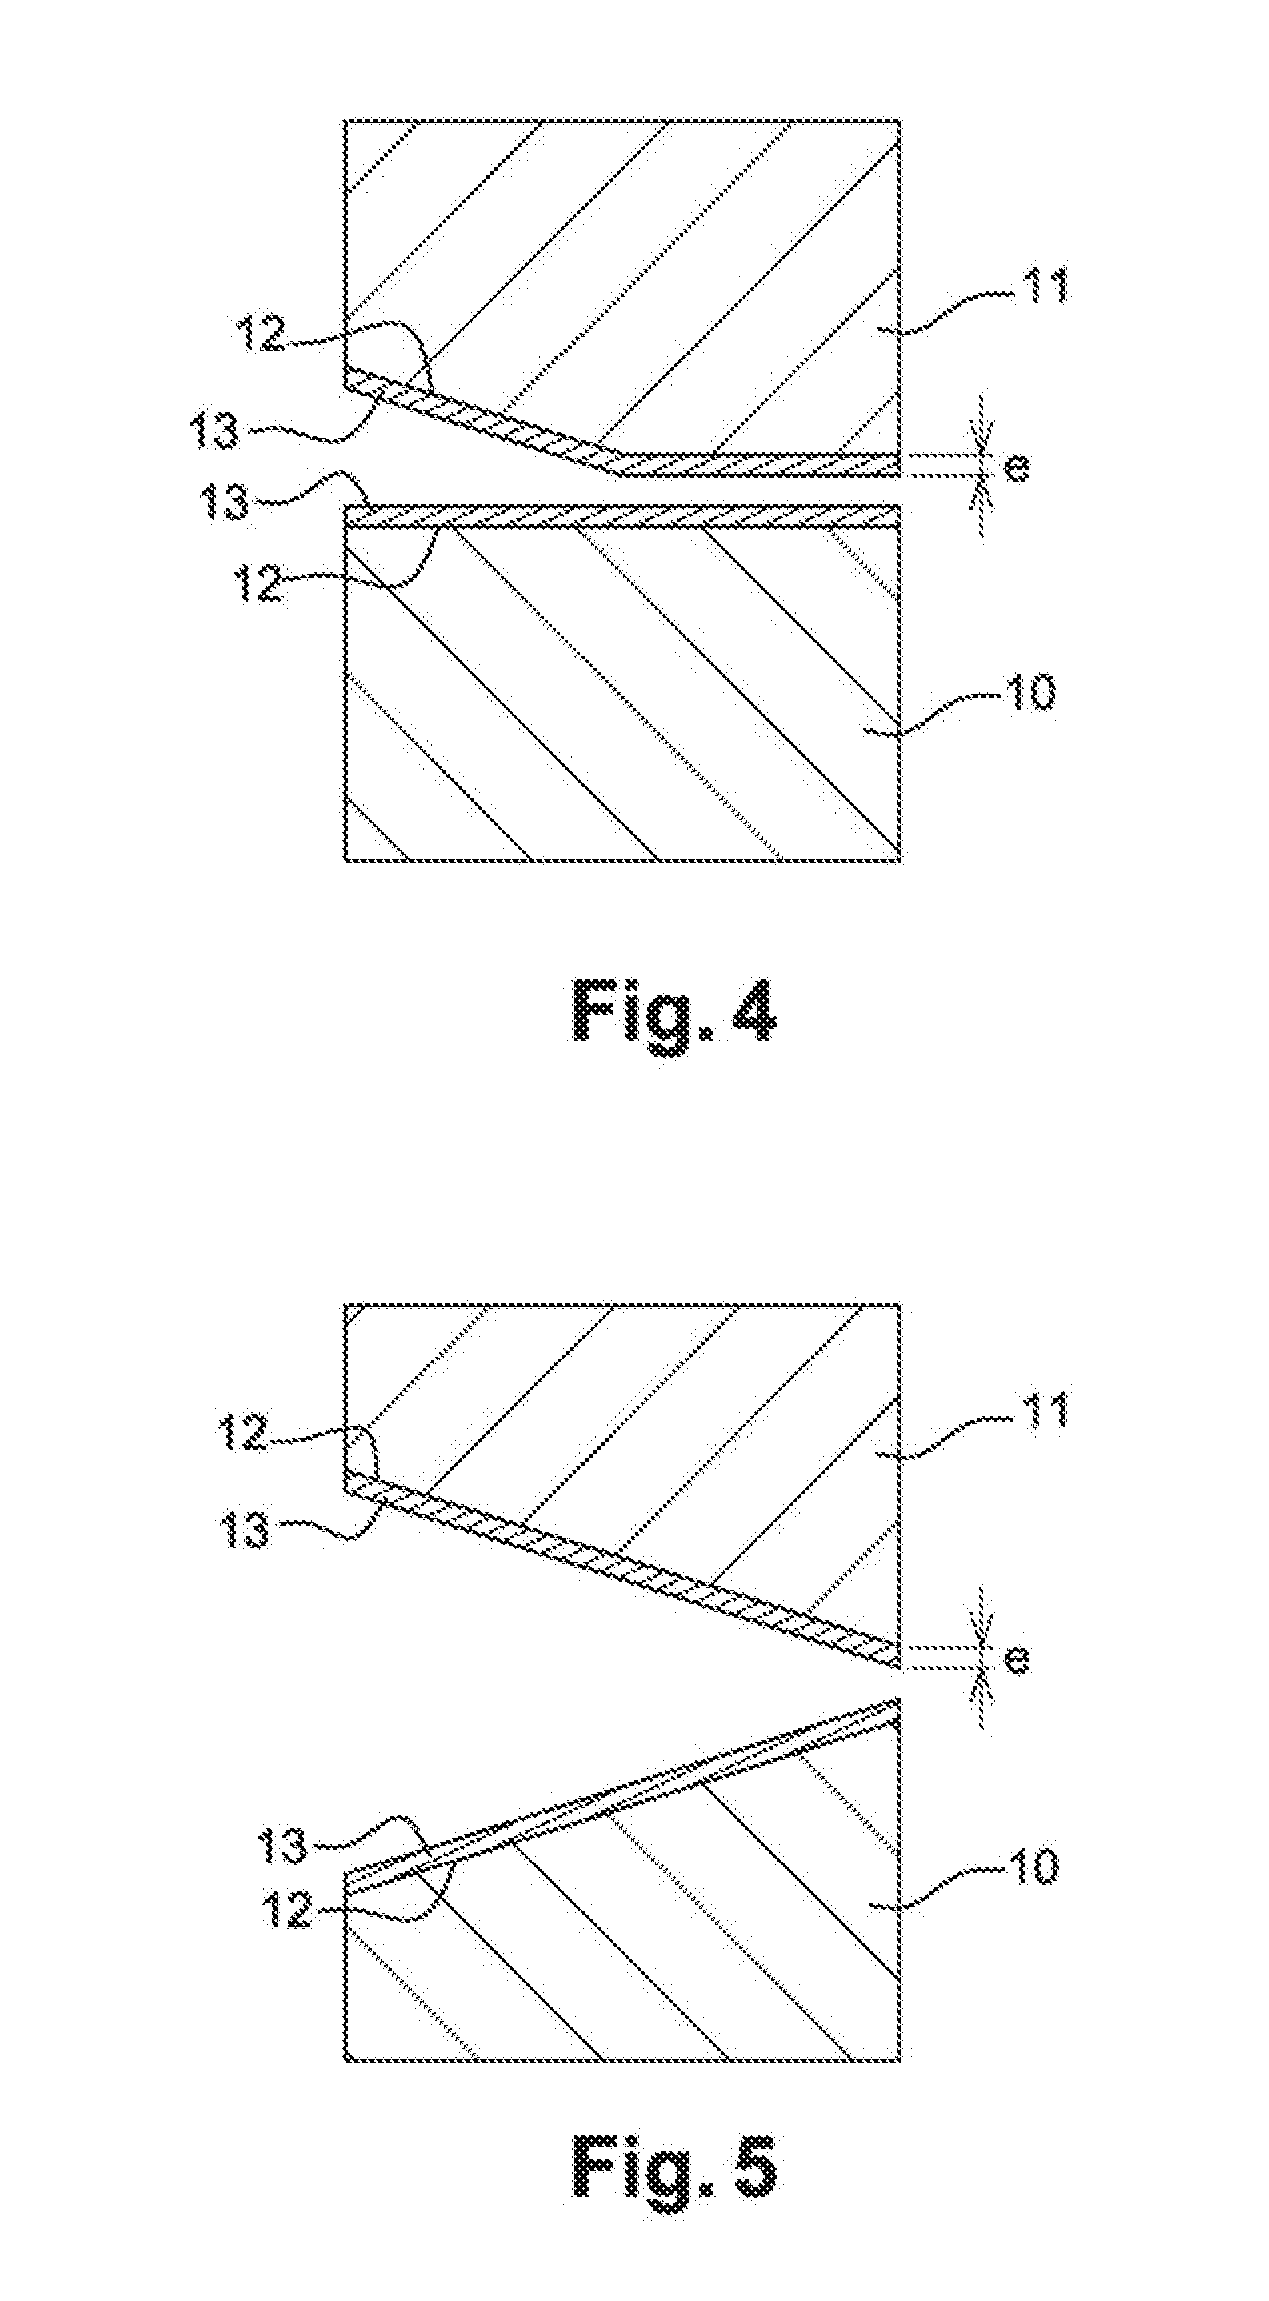 Active surface for a packing seal intended for a shaft sealing system